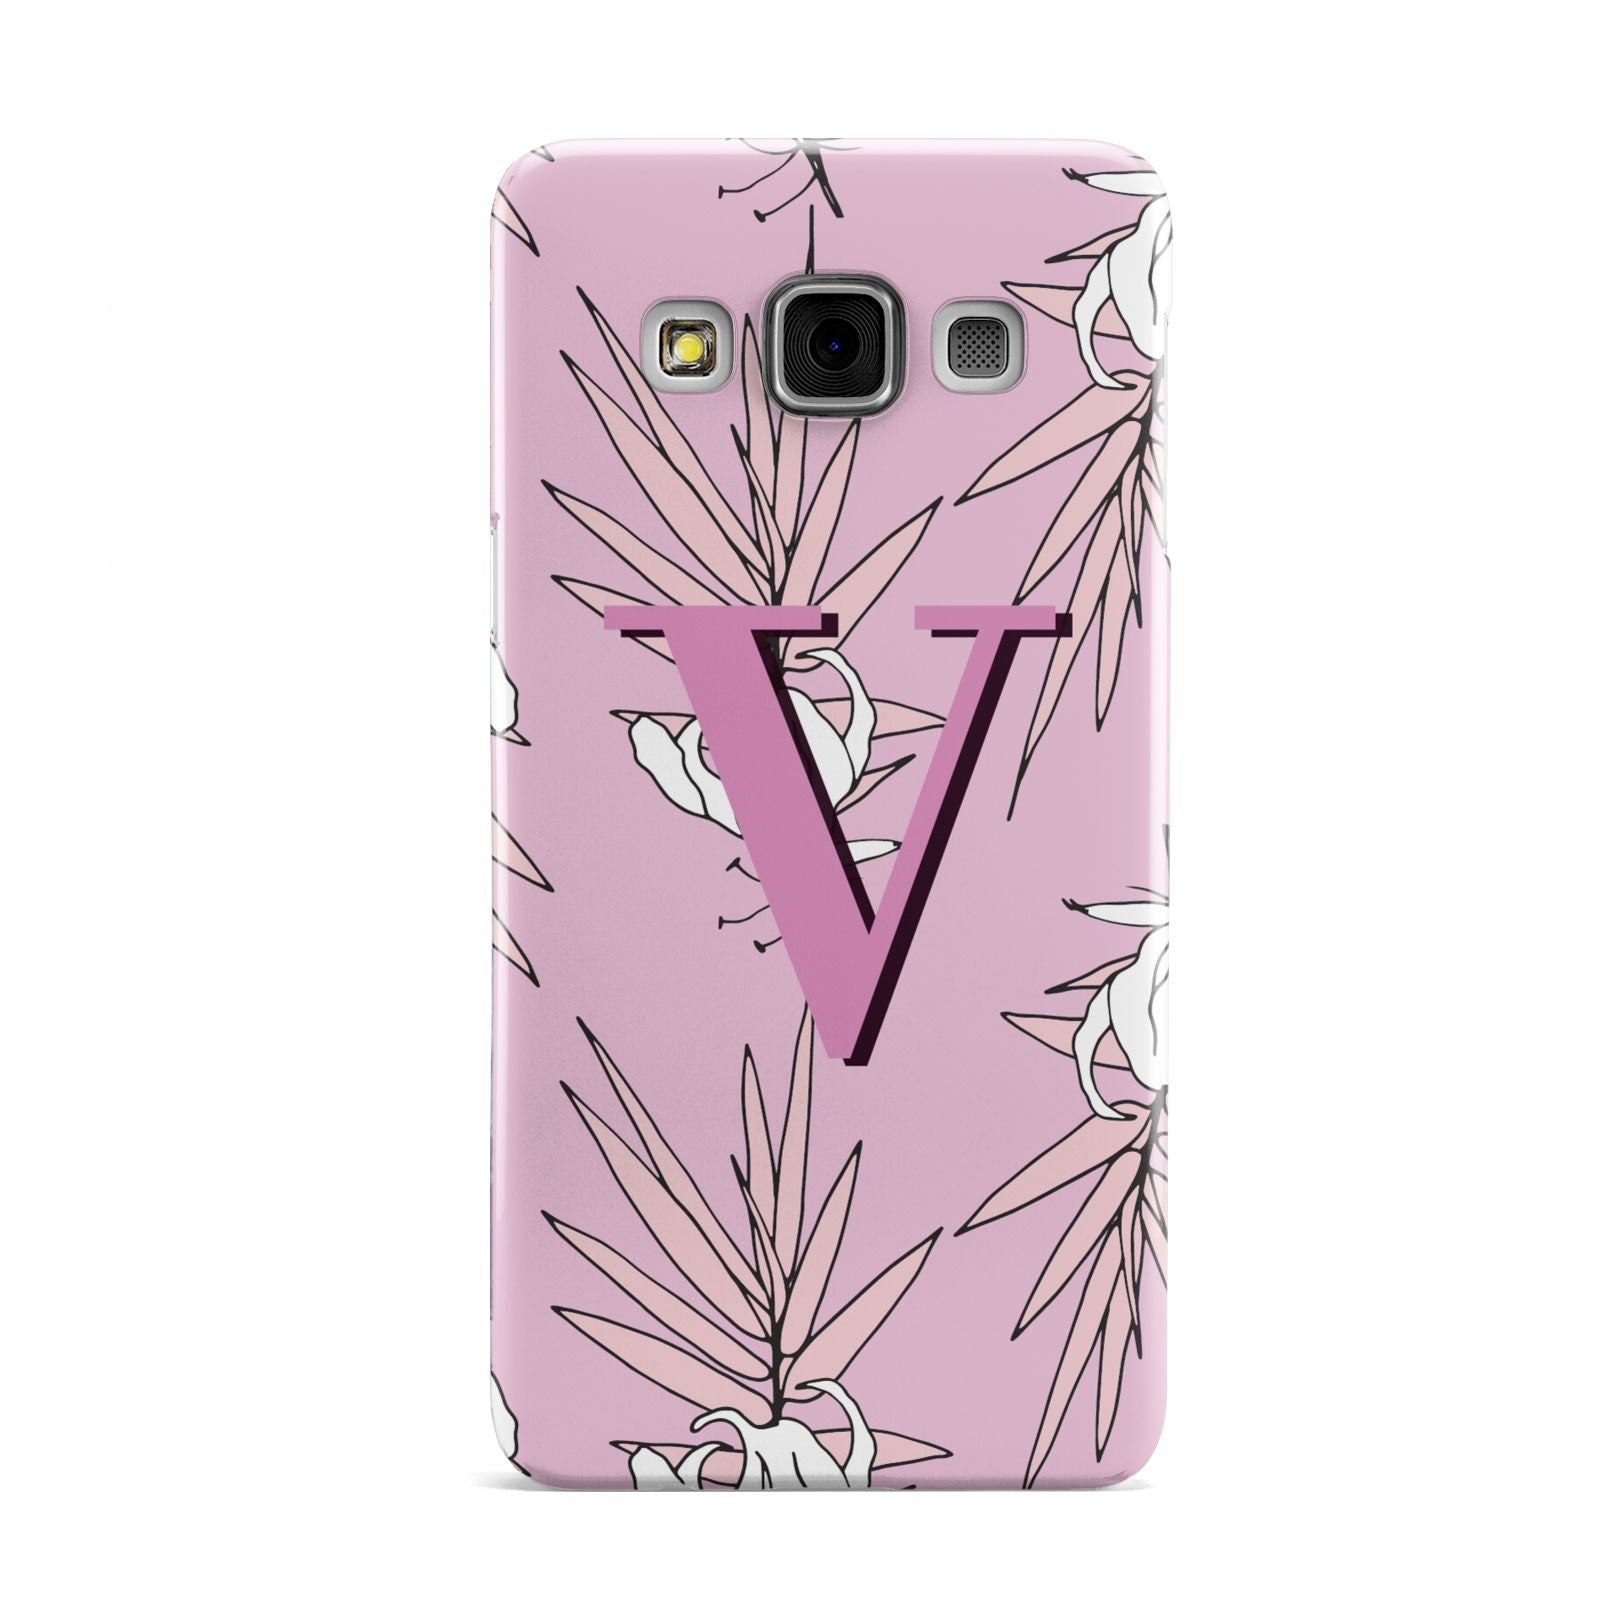 Personalised Pink and White Floral Monogram Samsung Galaxy A3 Case